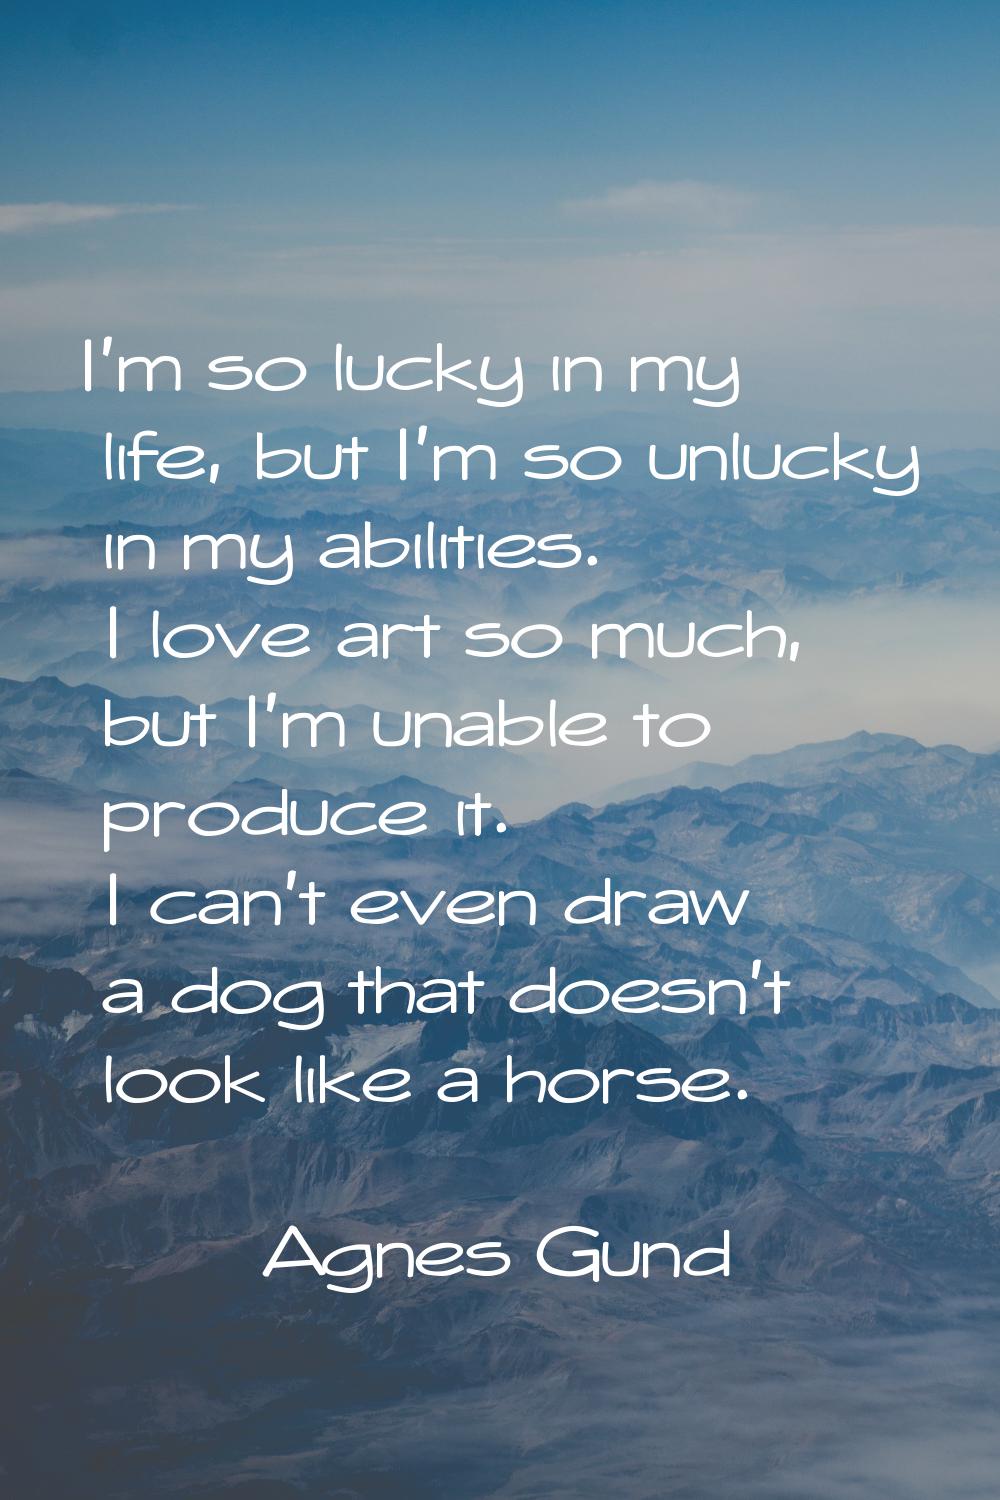 I'm so lucky in my life, but I'm so unlucky in my abilities. I love art so much, but I'm unable to 